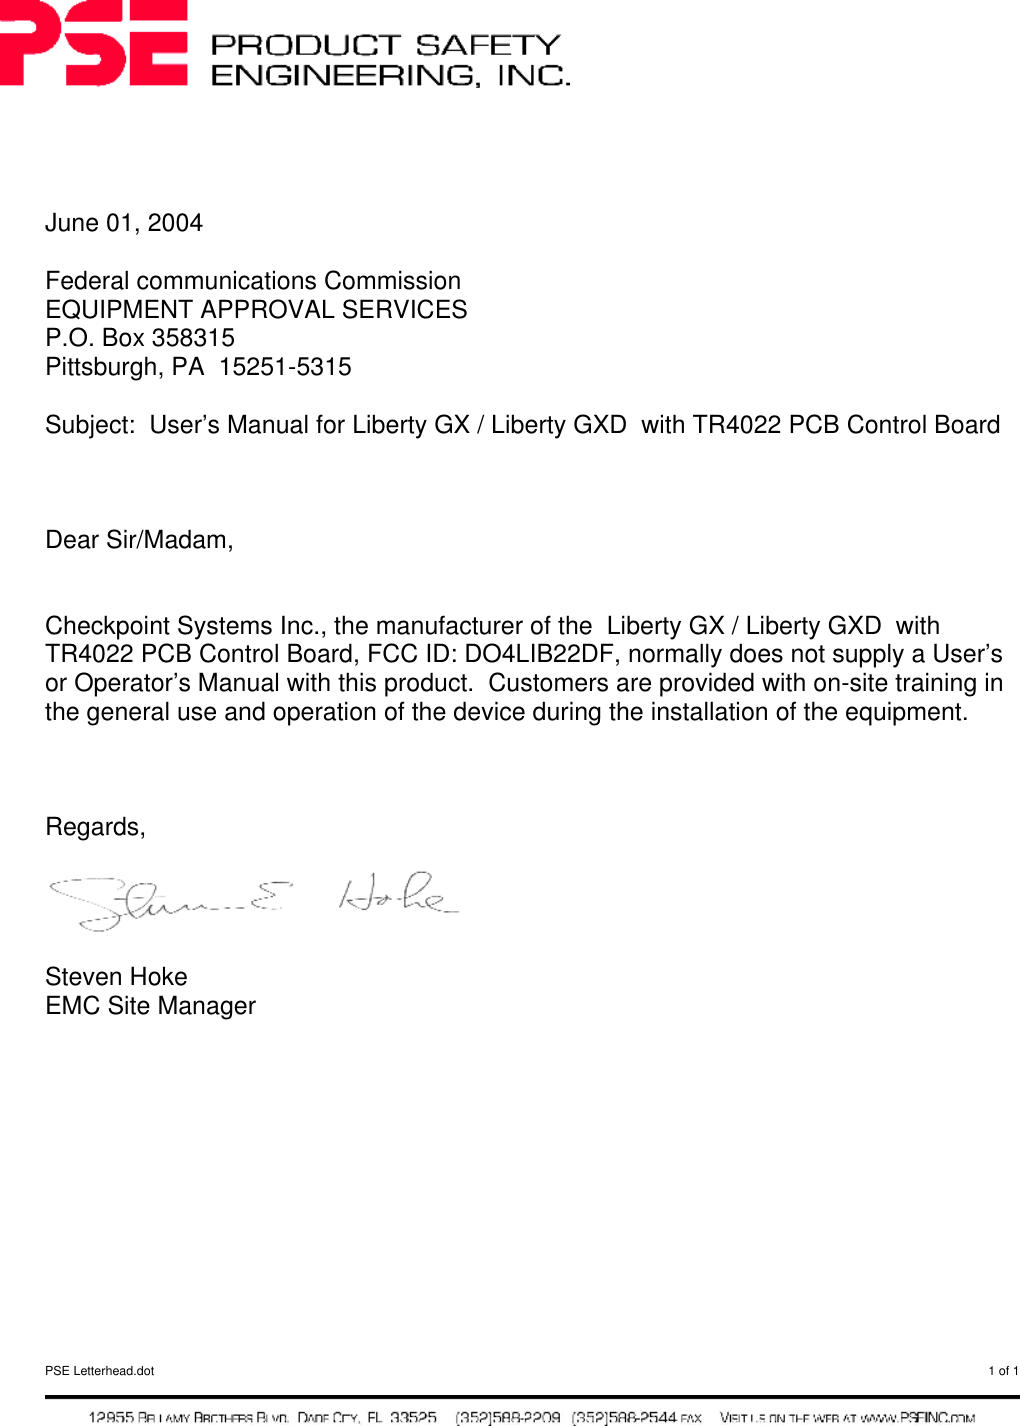  PSE Letterhead.dot  1 of 1       June 01, 2004  Federal communications Commission EQUIPMENT APPROVAL SERVICES P.O. Box 358315 Pittsburgh, PA  15251-5315  Subject:  User’s Manual for Liberty GX / Liberty GXD  with TR4022 PCB Control Board    Dear Sir/Madam,   Checkpoint Systems Inc., the manufacturer of the  Liberty GX / Liberty GXD  with TR4022 PCB Control Board, FCC ID: DO4LIB22DF, normally does not supply a User’s or Operator’s Manual with this product.  Customers are provided with on-site training in the general use and operation of the device during the installation of the equipment.     Regards,    Steven Hoke EMC Site Manager     